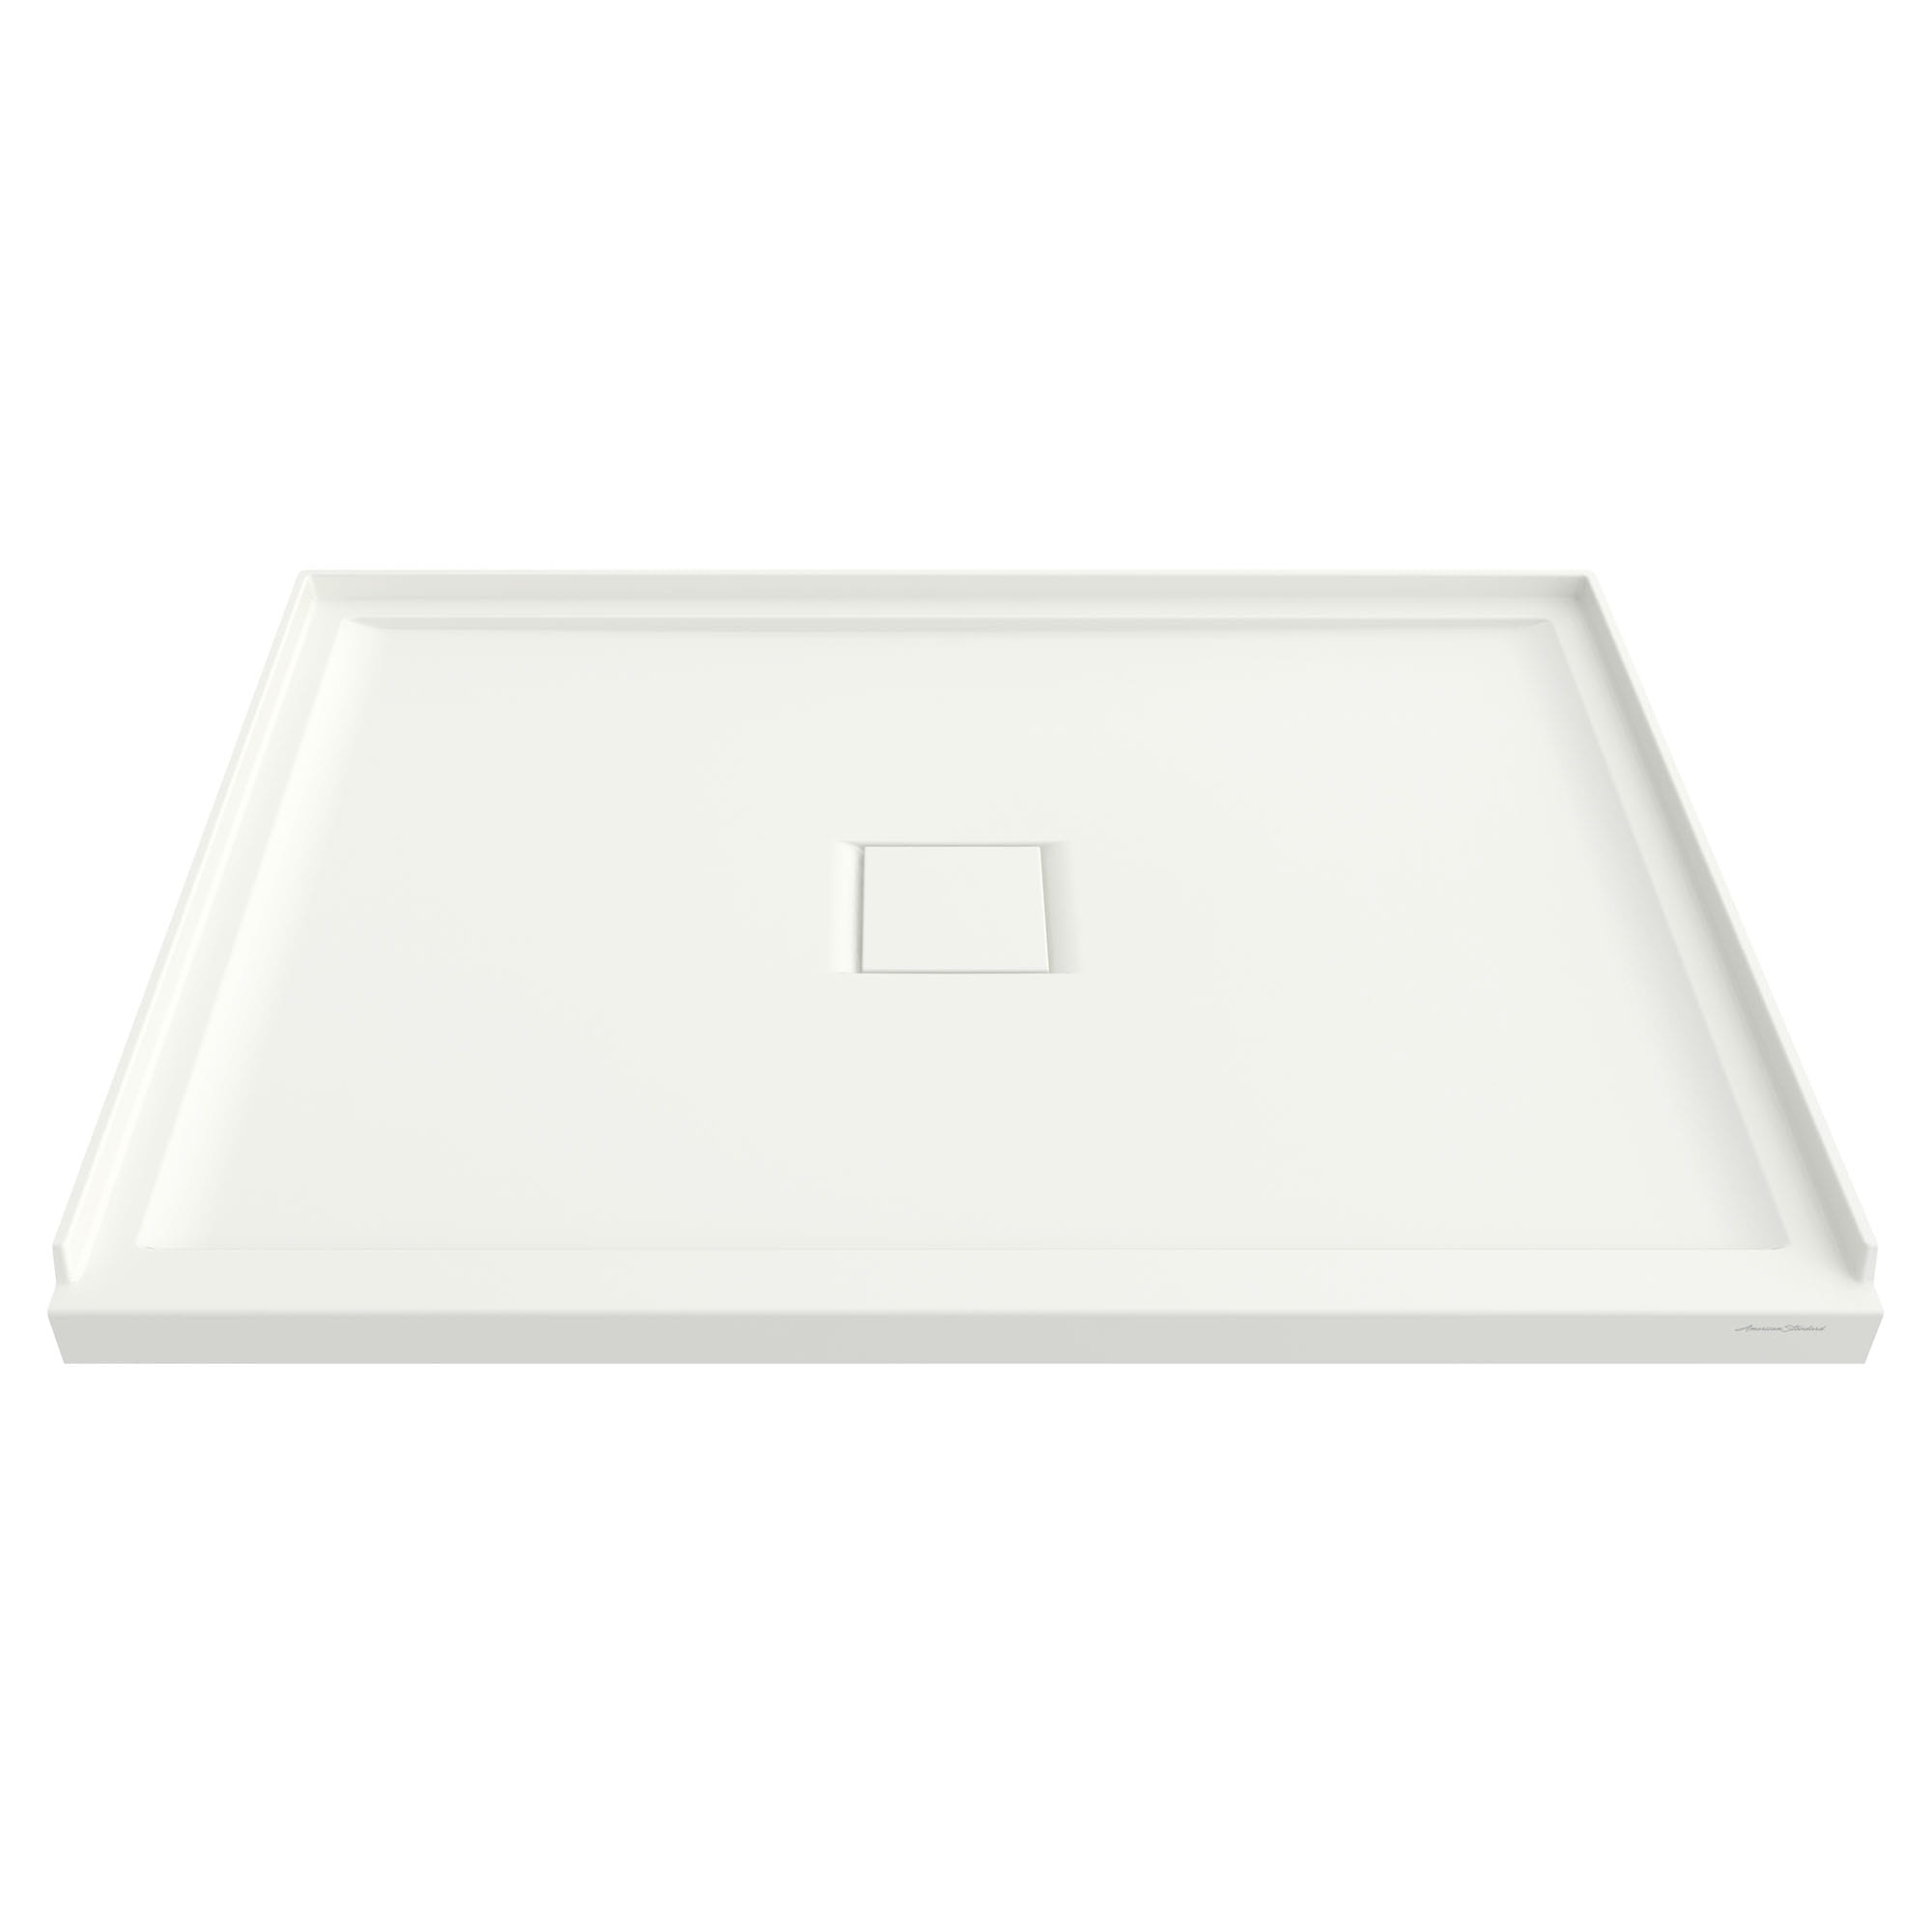 Townsend 48 x 36 Inch Single Threshold Shower Bases With Center Drain SOFT WHITE